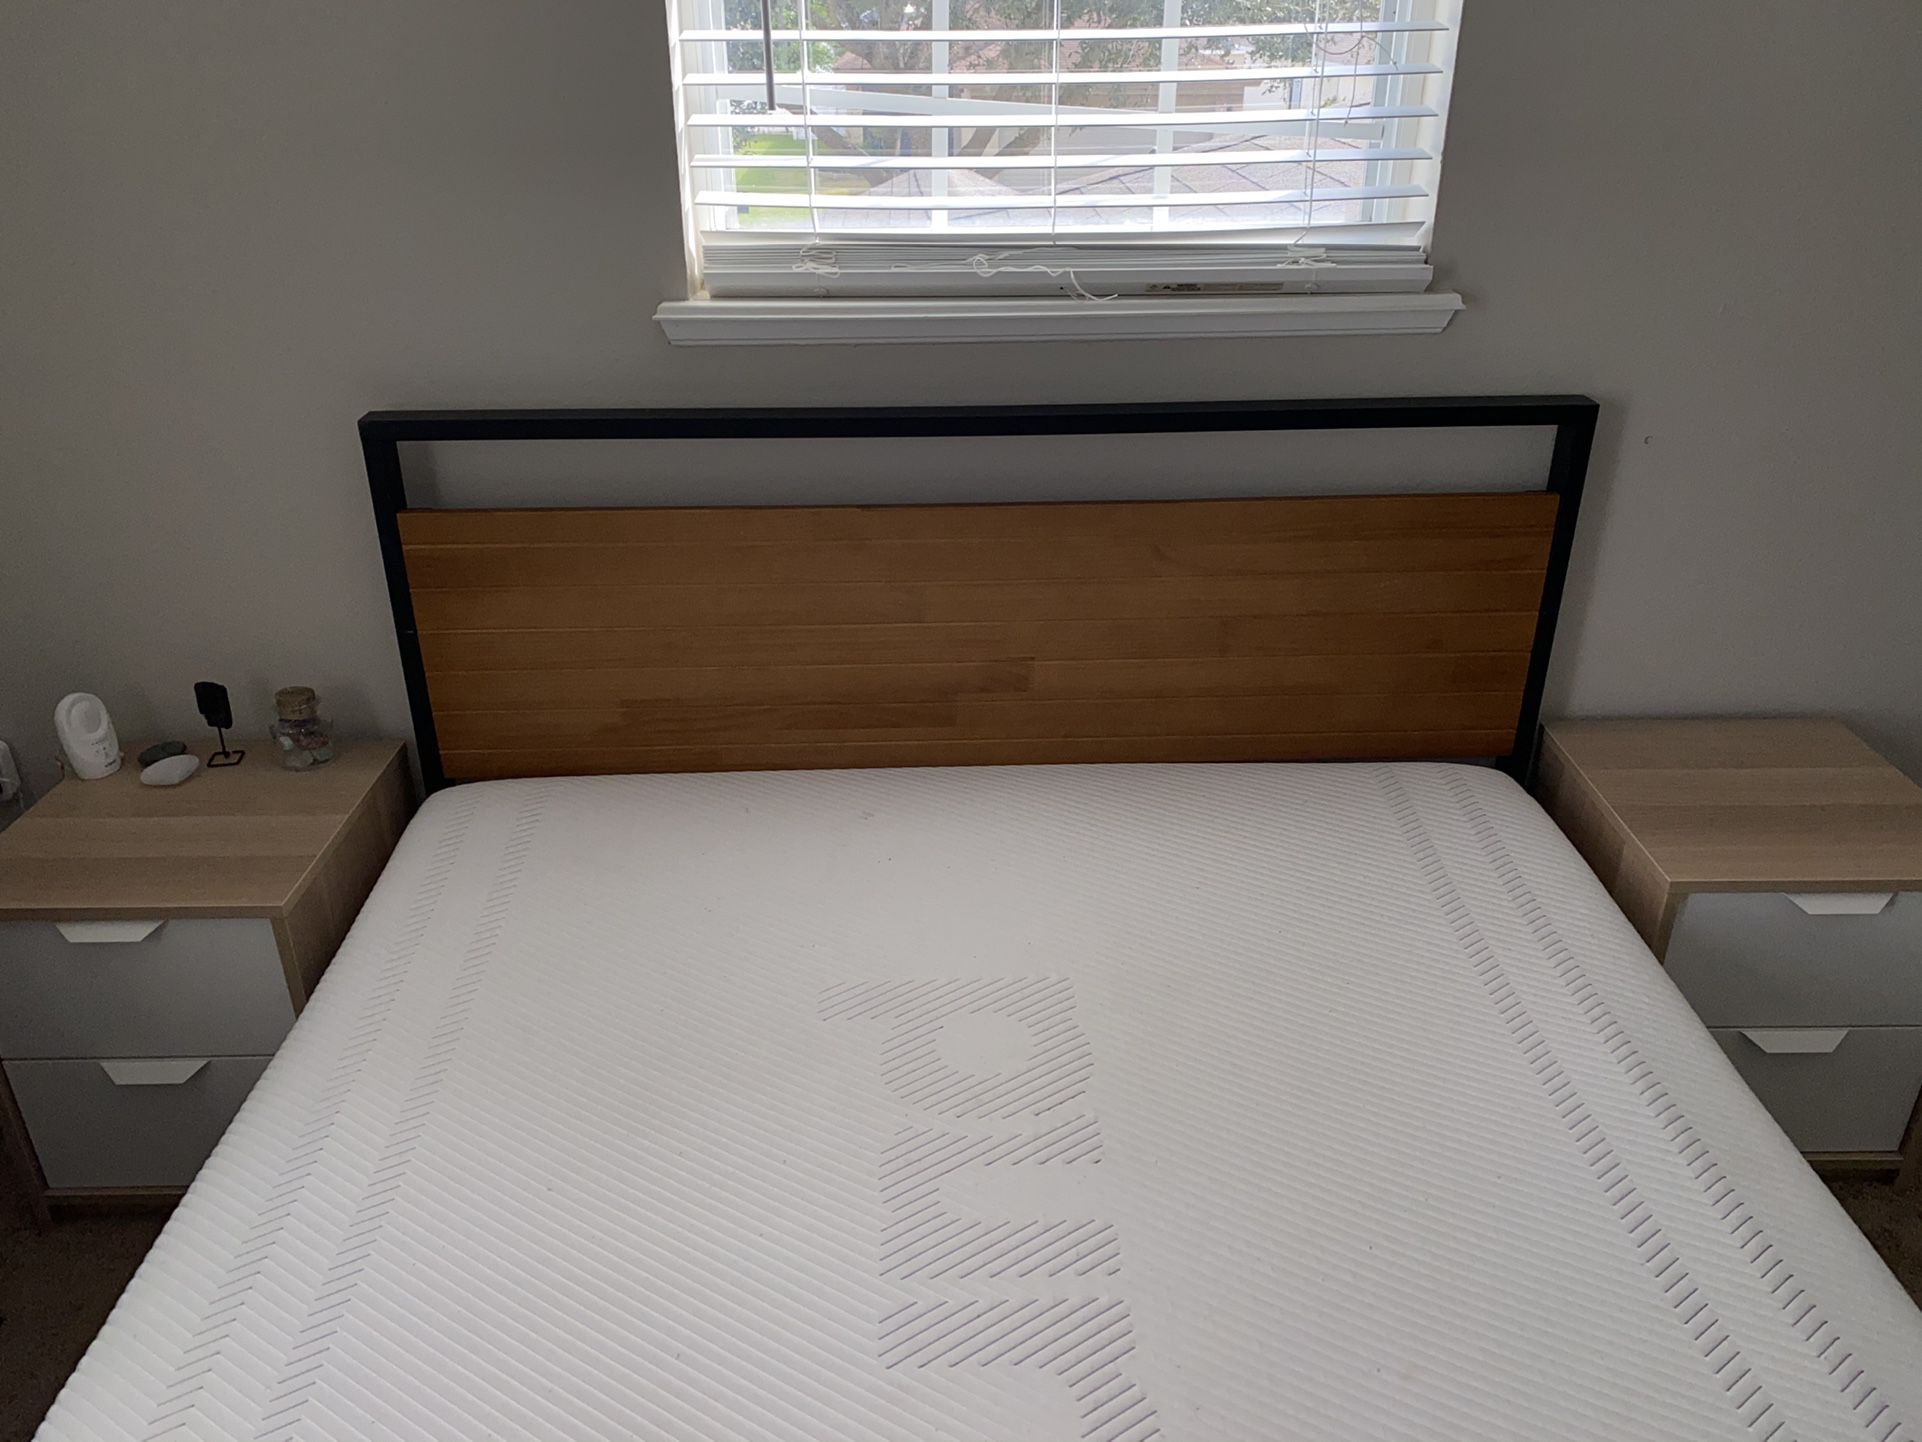 QUEEN SIZE BED FRAME $100 obo